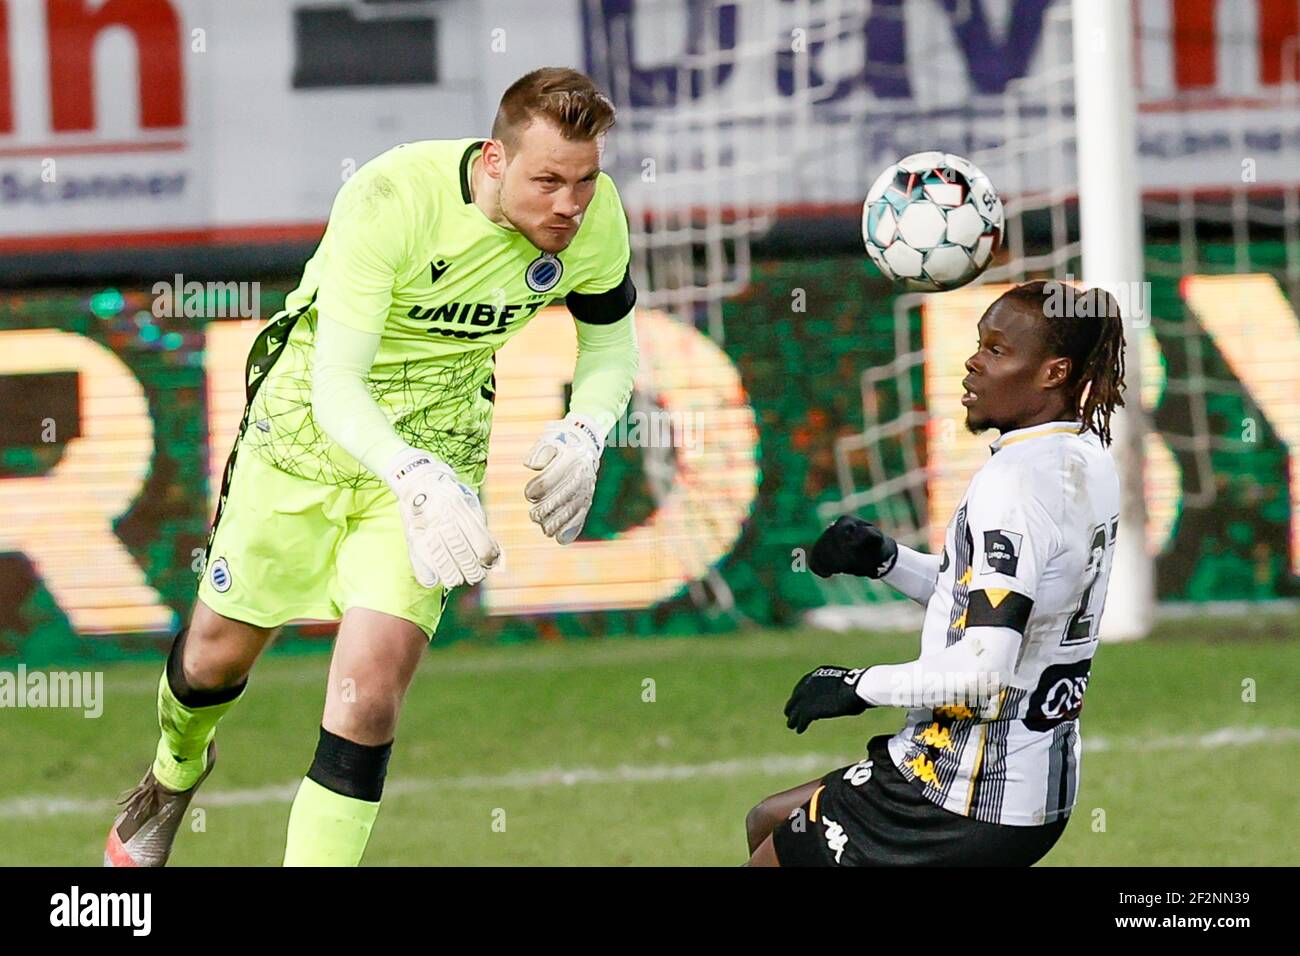 Club's goalkeeper Simon Mignolet and Charleroi's Mamadou Fall fight for the ball during a postponed soccer match between Sporting Charleroi and Club B Stock Photo